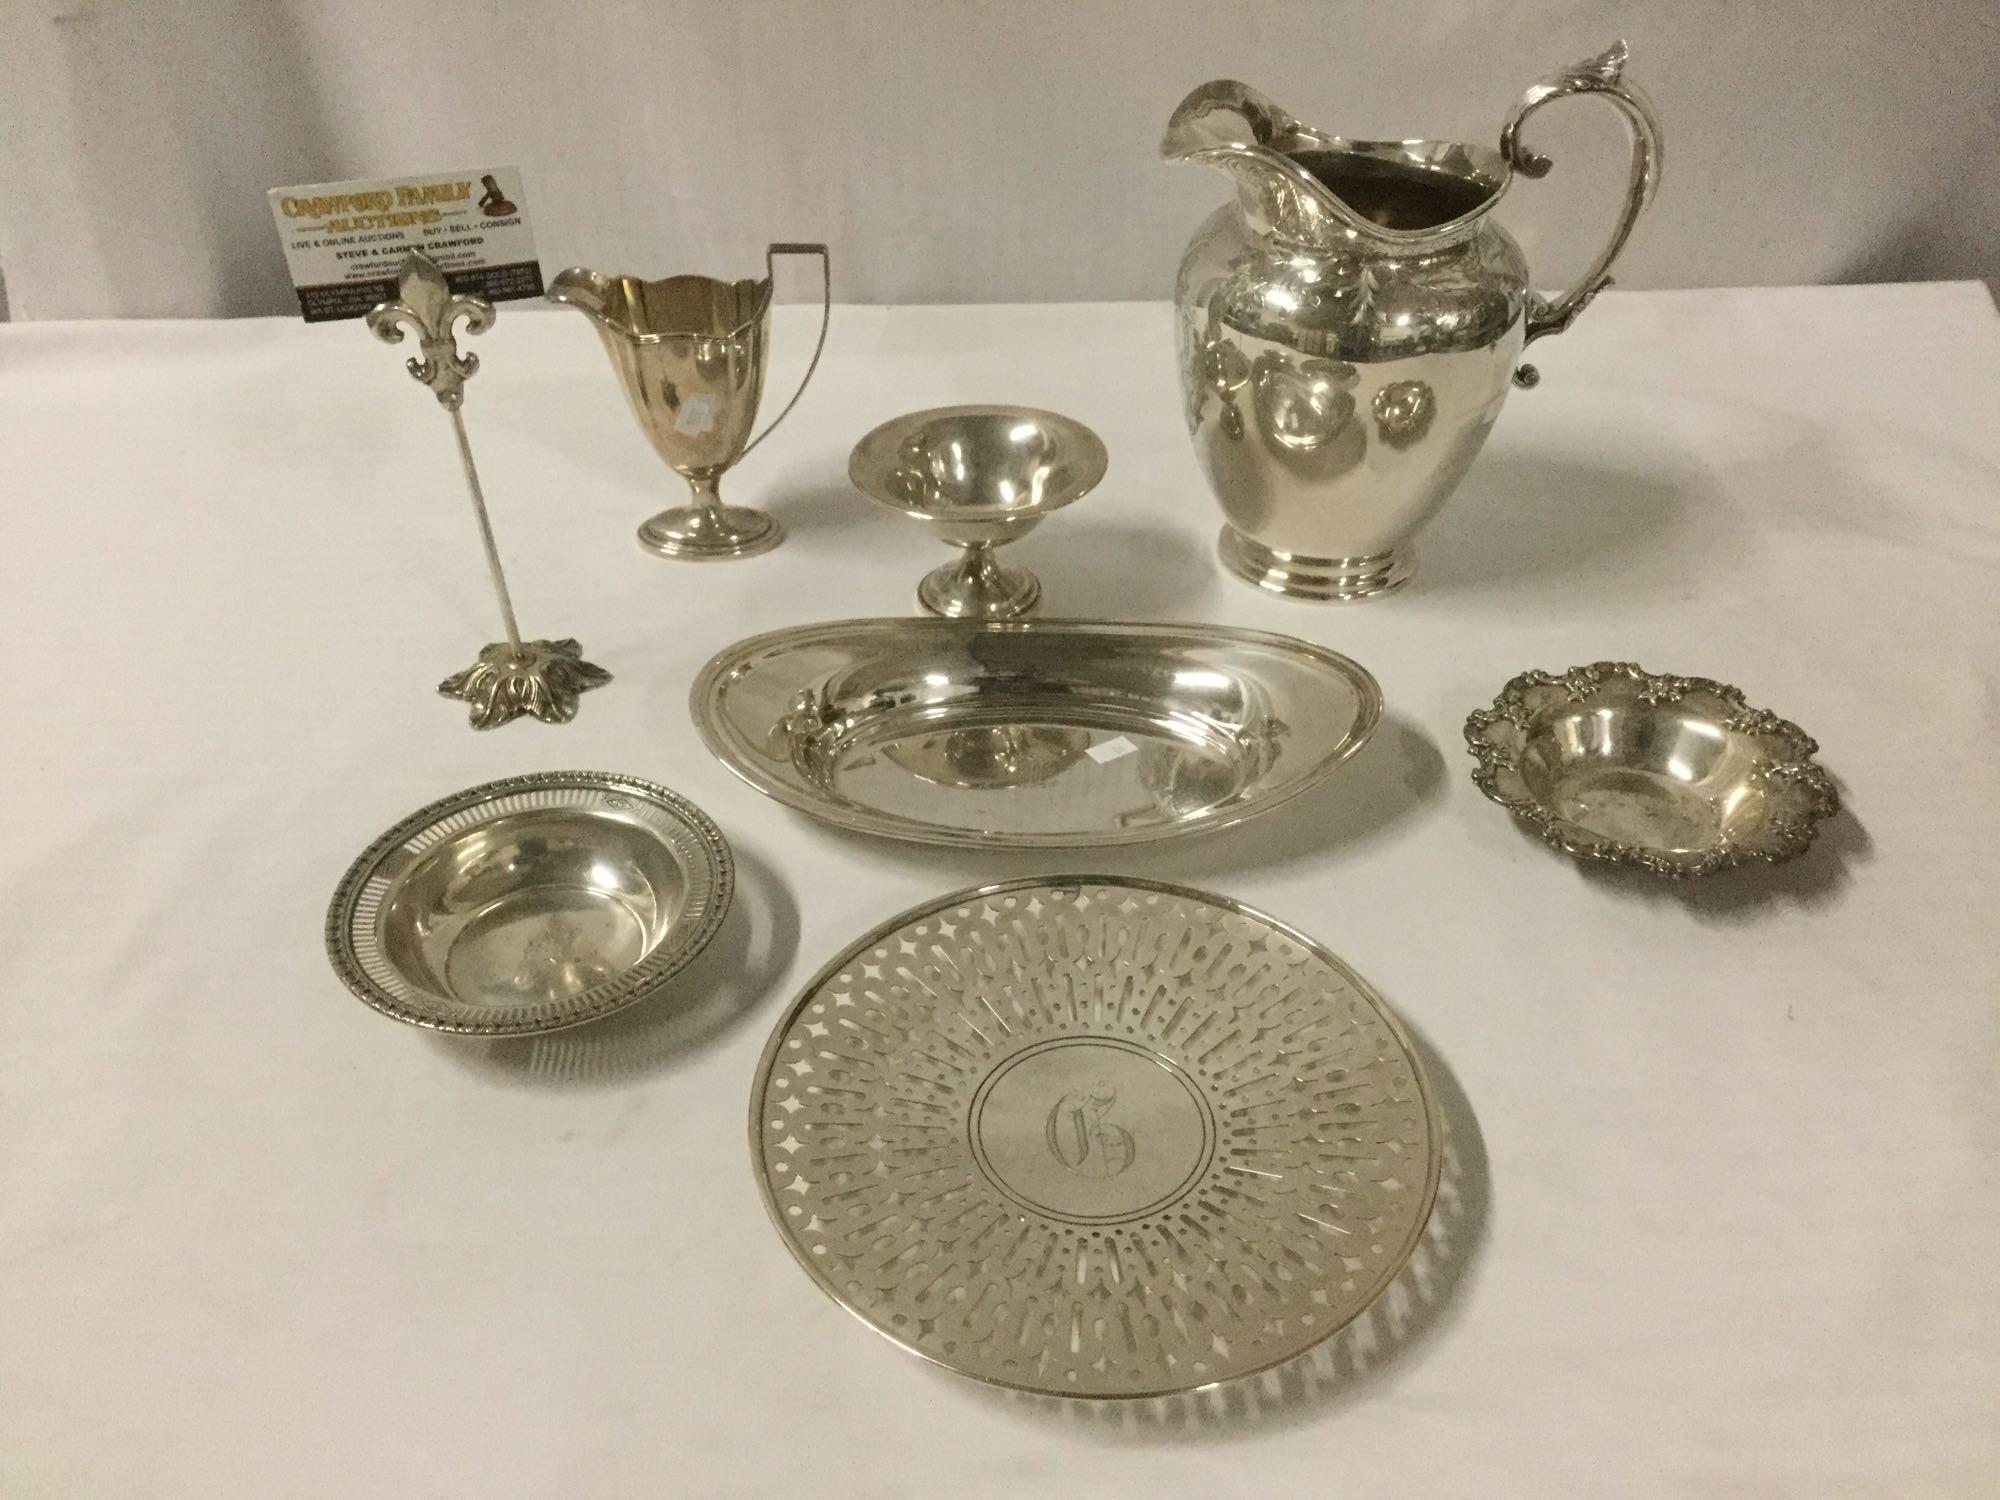 7 pc of vintage sterling silver decor incl. water pitcher, plate, etc - approx 1785 gram ttw